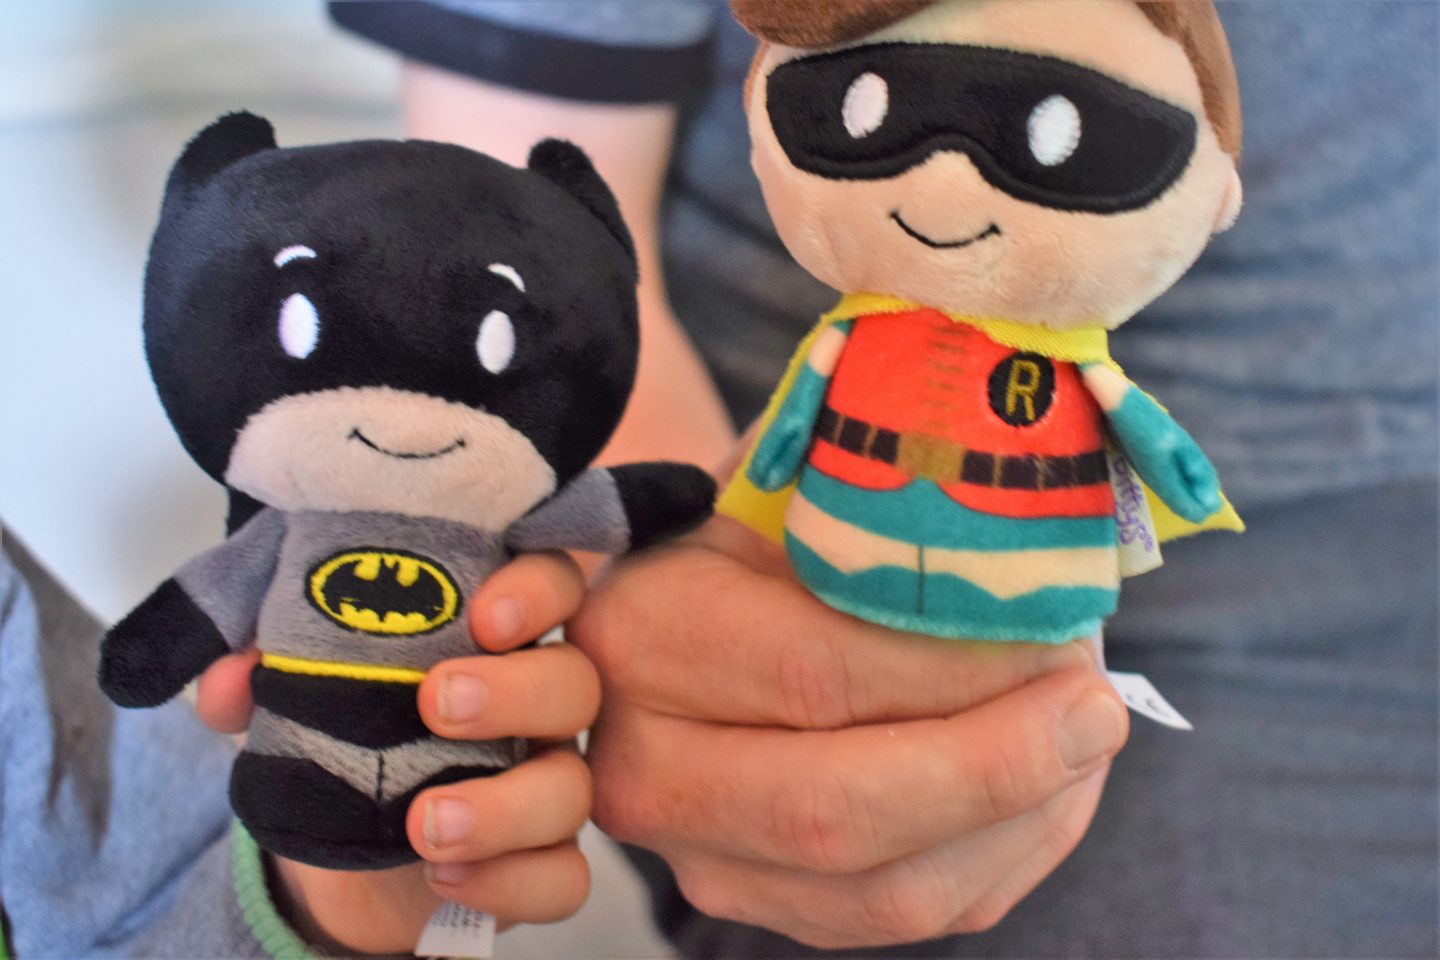 ‘Daddy, you’re my hero’ – Celebrating Super Dads with Hallmark this Father’s Day